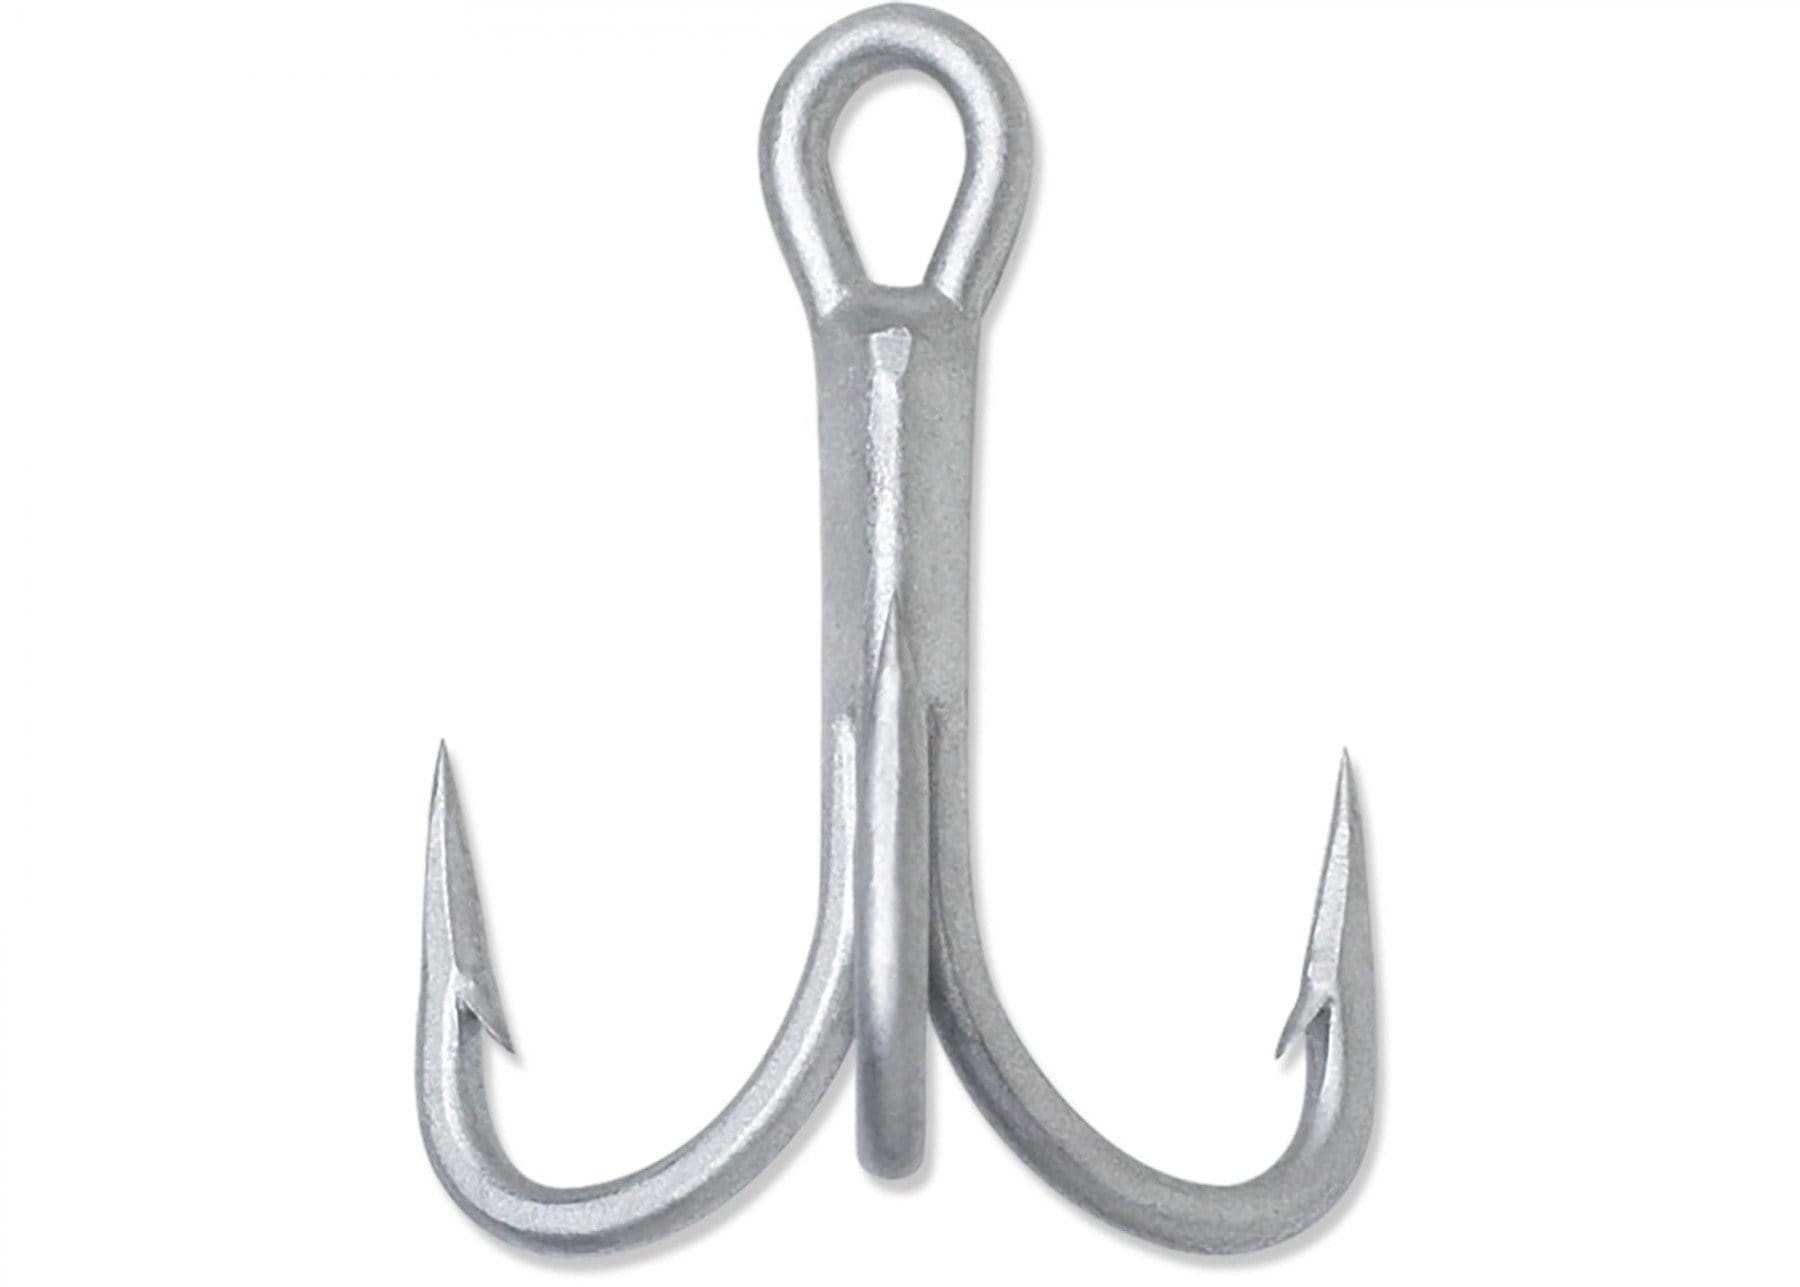 Carbon Steel Fishing Tackle Hook, Treble Strong Fishing Hooks